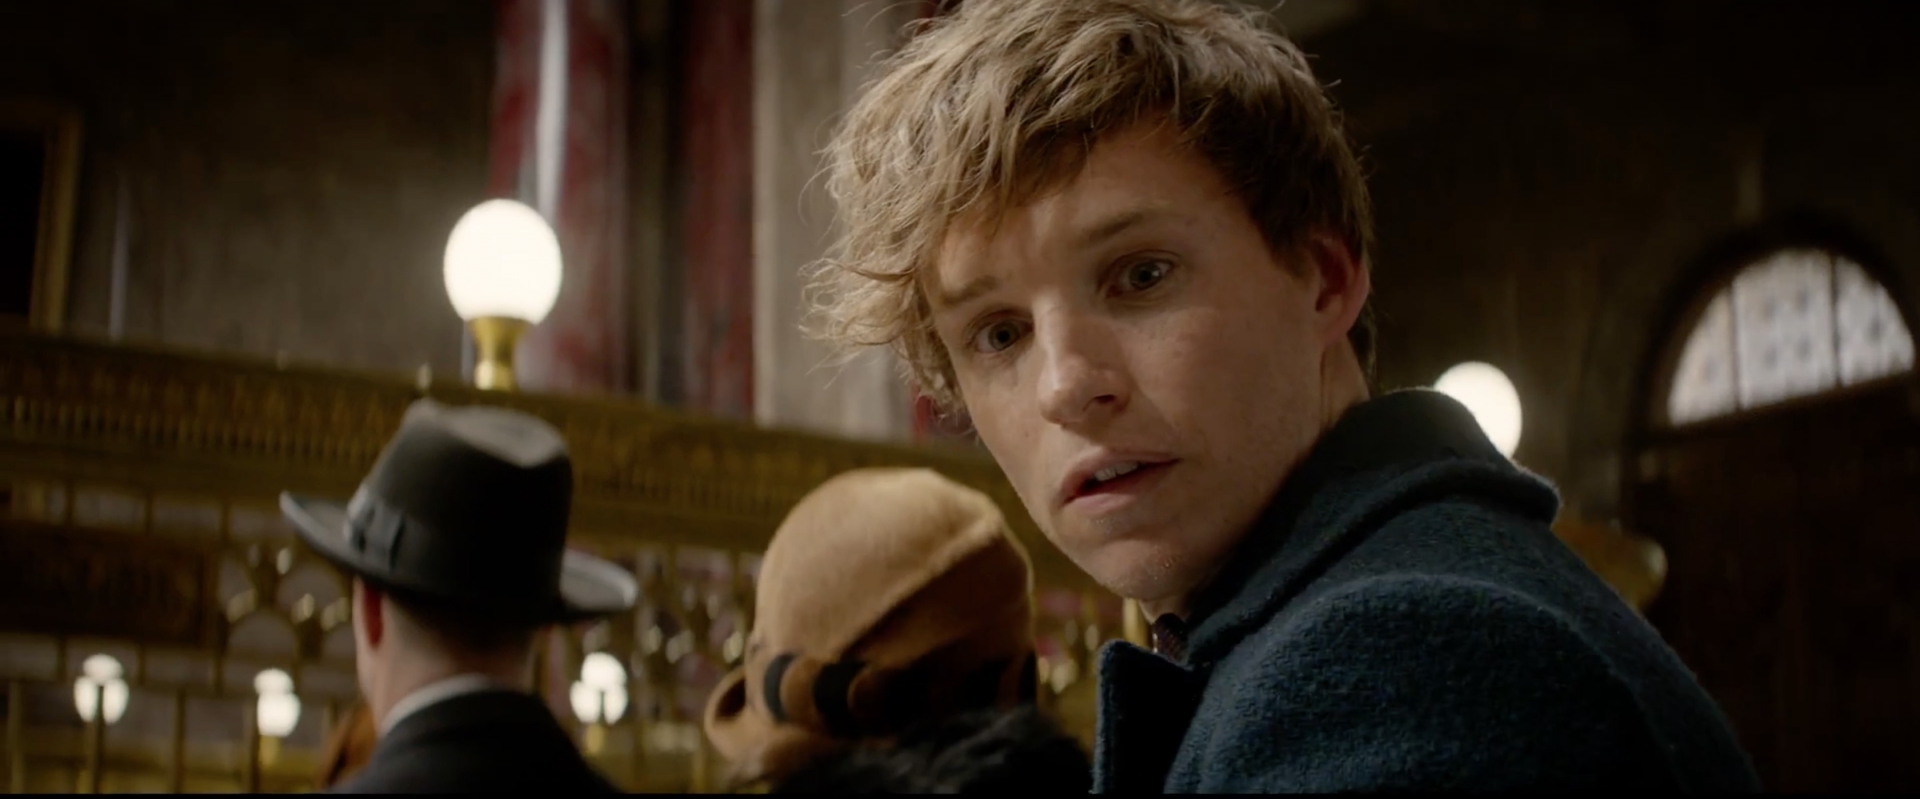 Fantastic Beasts And Where To Find Them Online Film Watch 2016